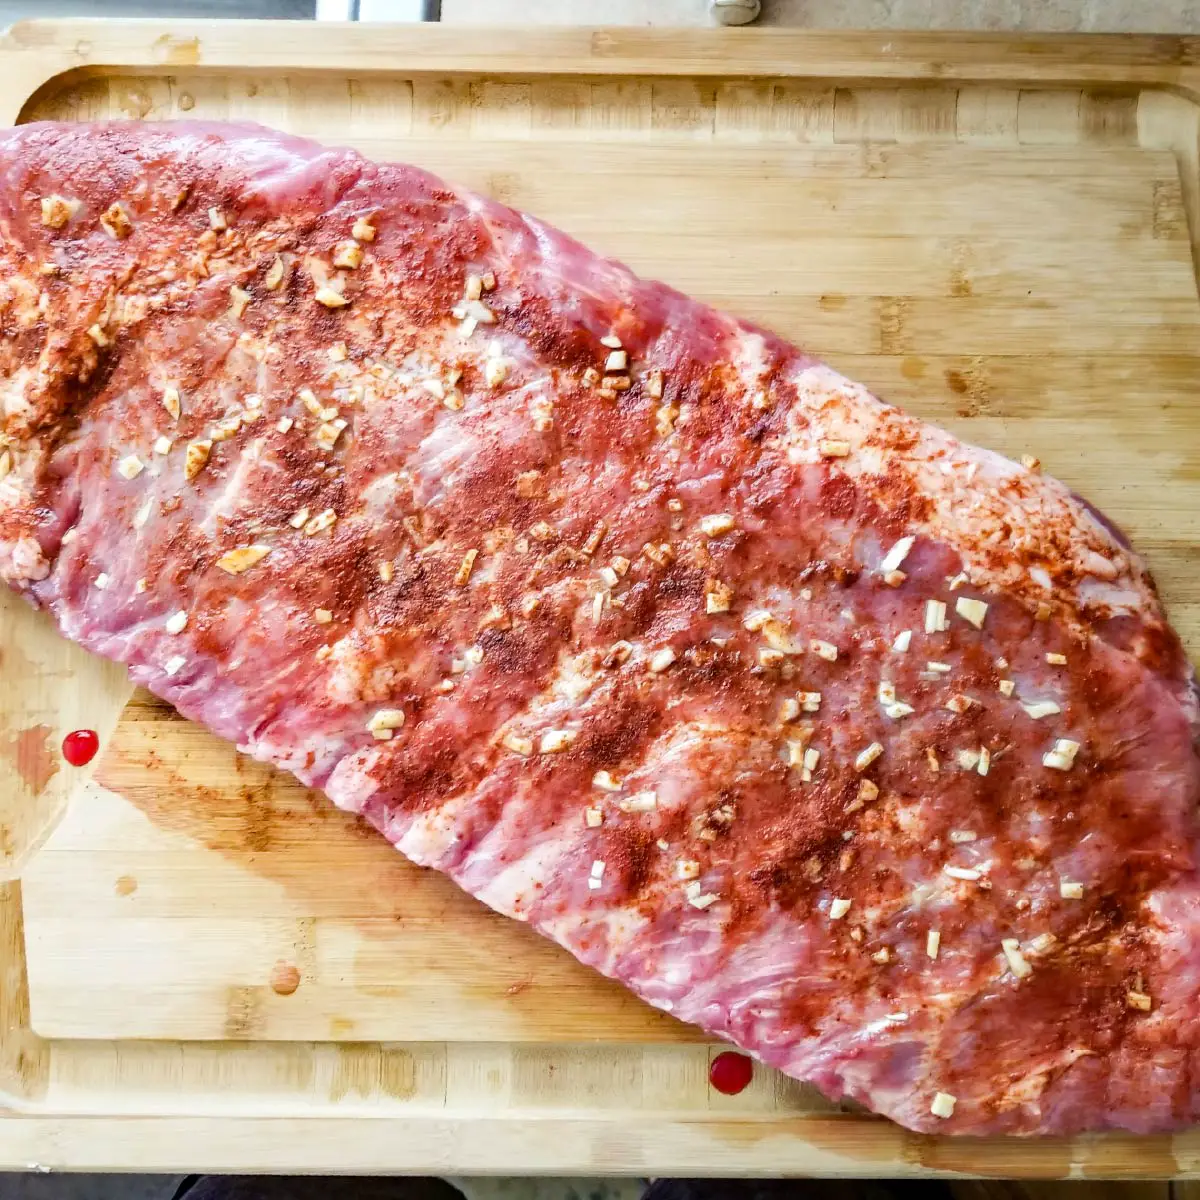 Rack of ribs sitting out on a cutting board with seasoning ready to go on grill.